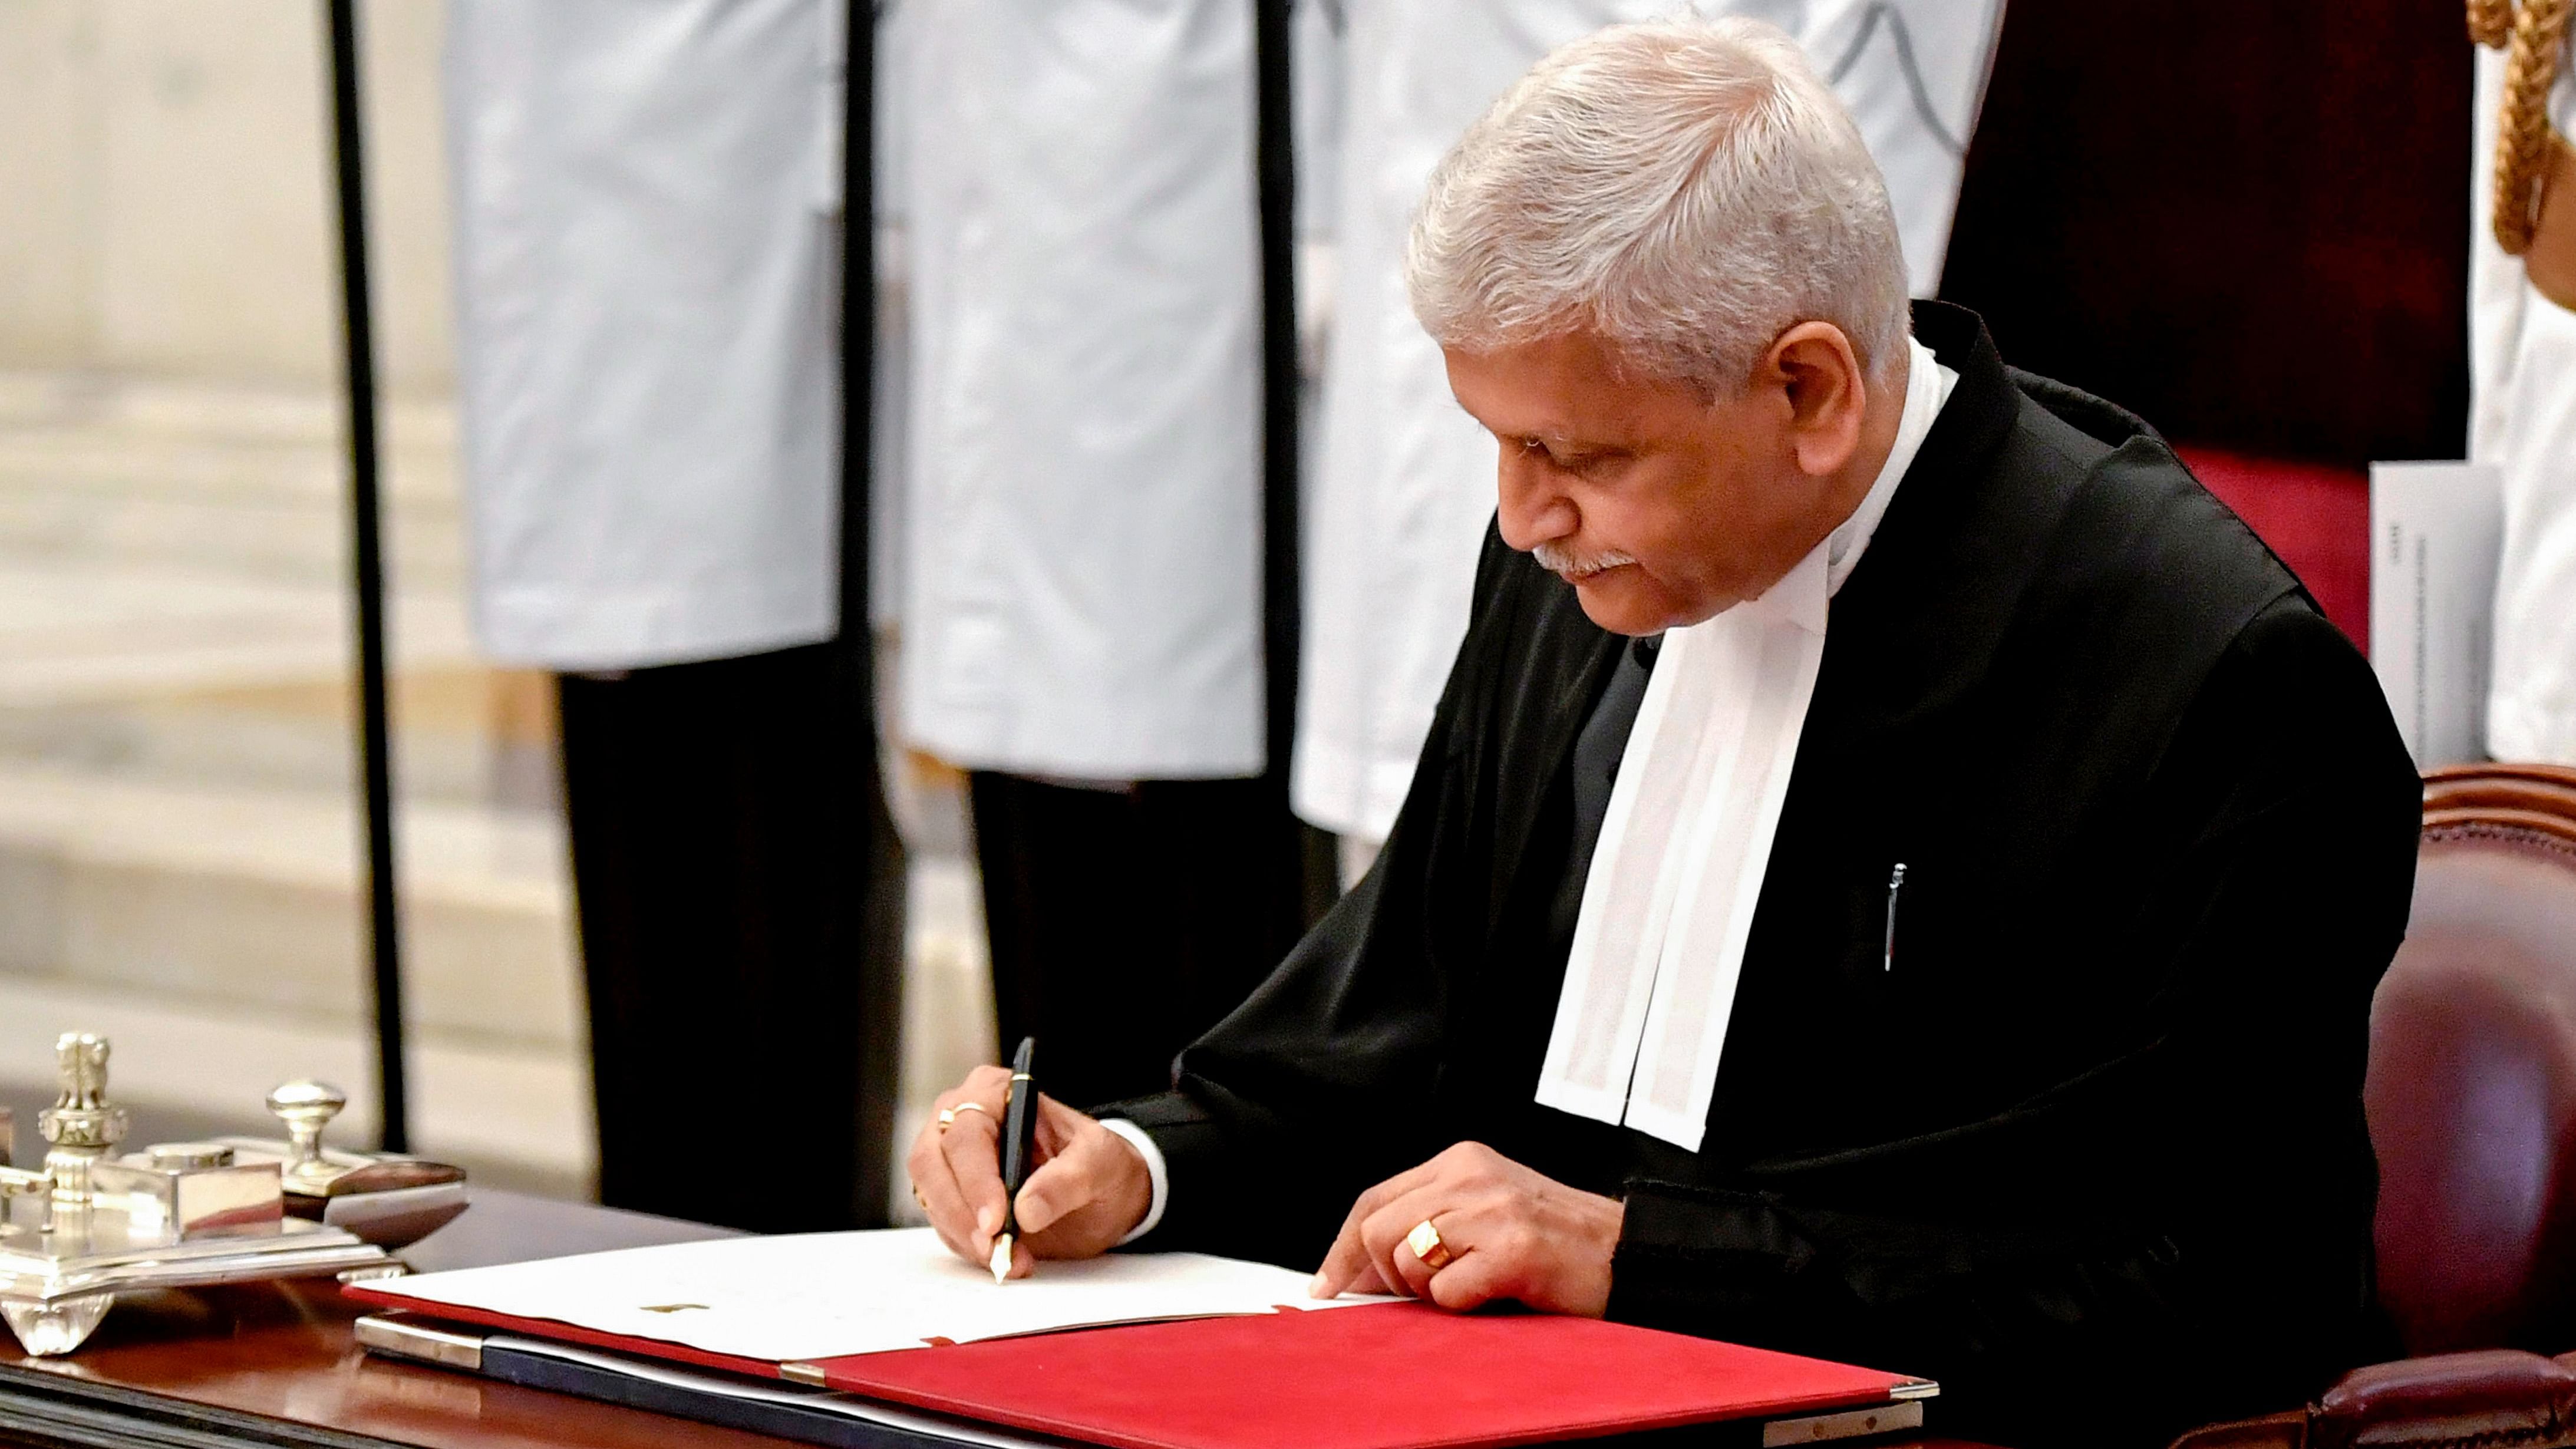 During Justice Lalit's tenure as the CJI, several important cases, including Constitution bench matters, are likely to come up for adjudication before the apex court. Credit: PTI Photo